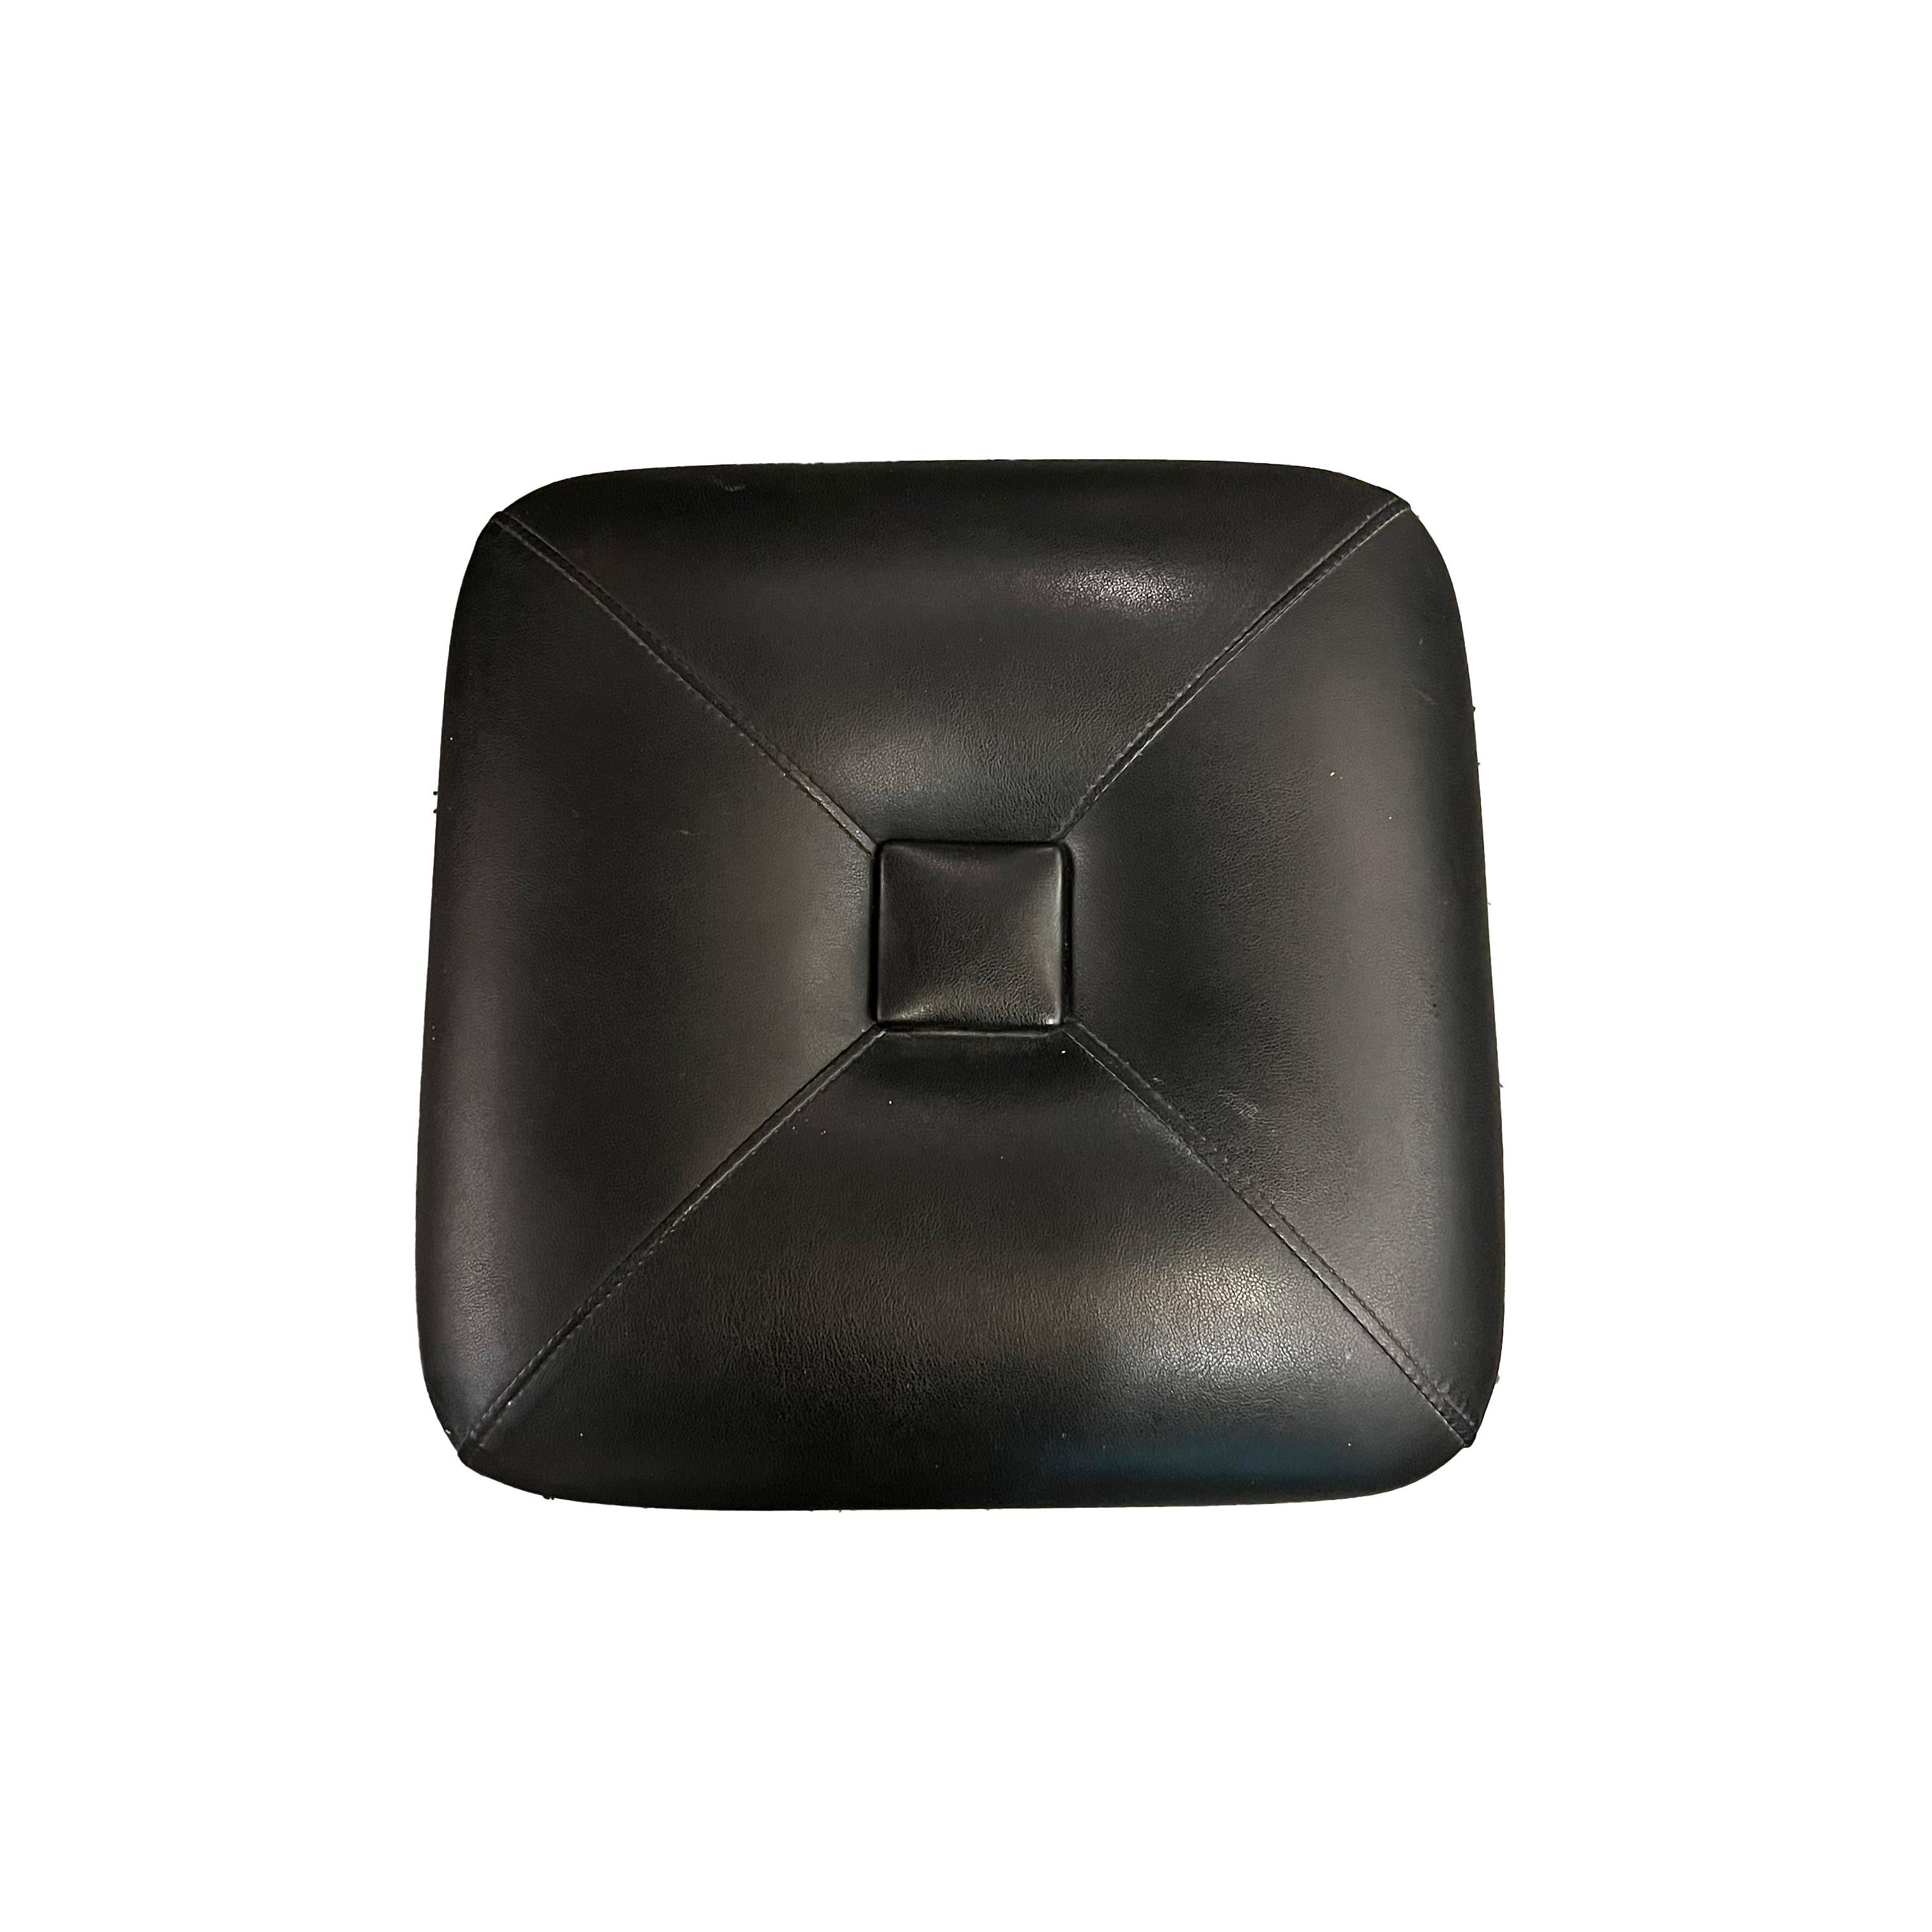 From the 1970s, this particular pouf is a chic nod to mid-century modern design. In good condition with subtle wear that enhances its character, this mushroom-shaped pouf exudes a space-age vibe, reminiscent of iconic designers like Pierre Paulin.